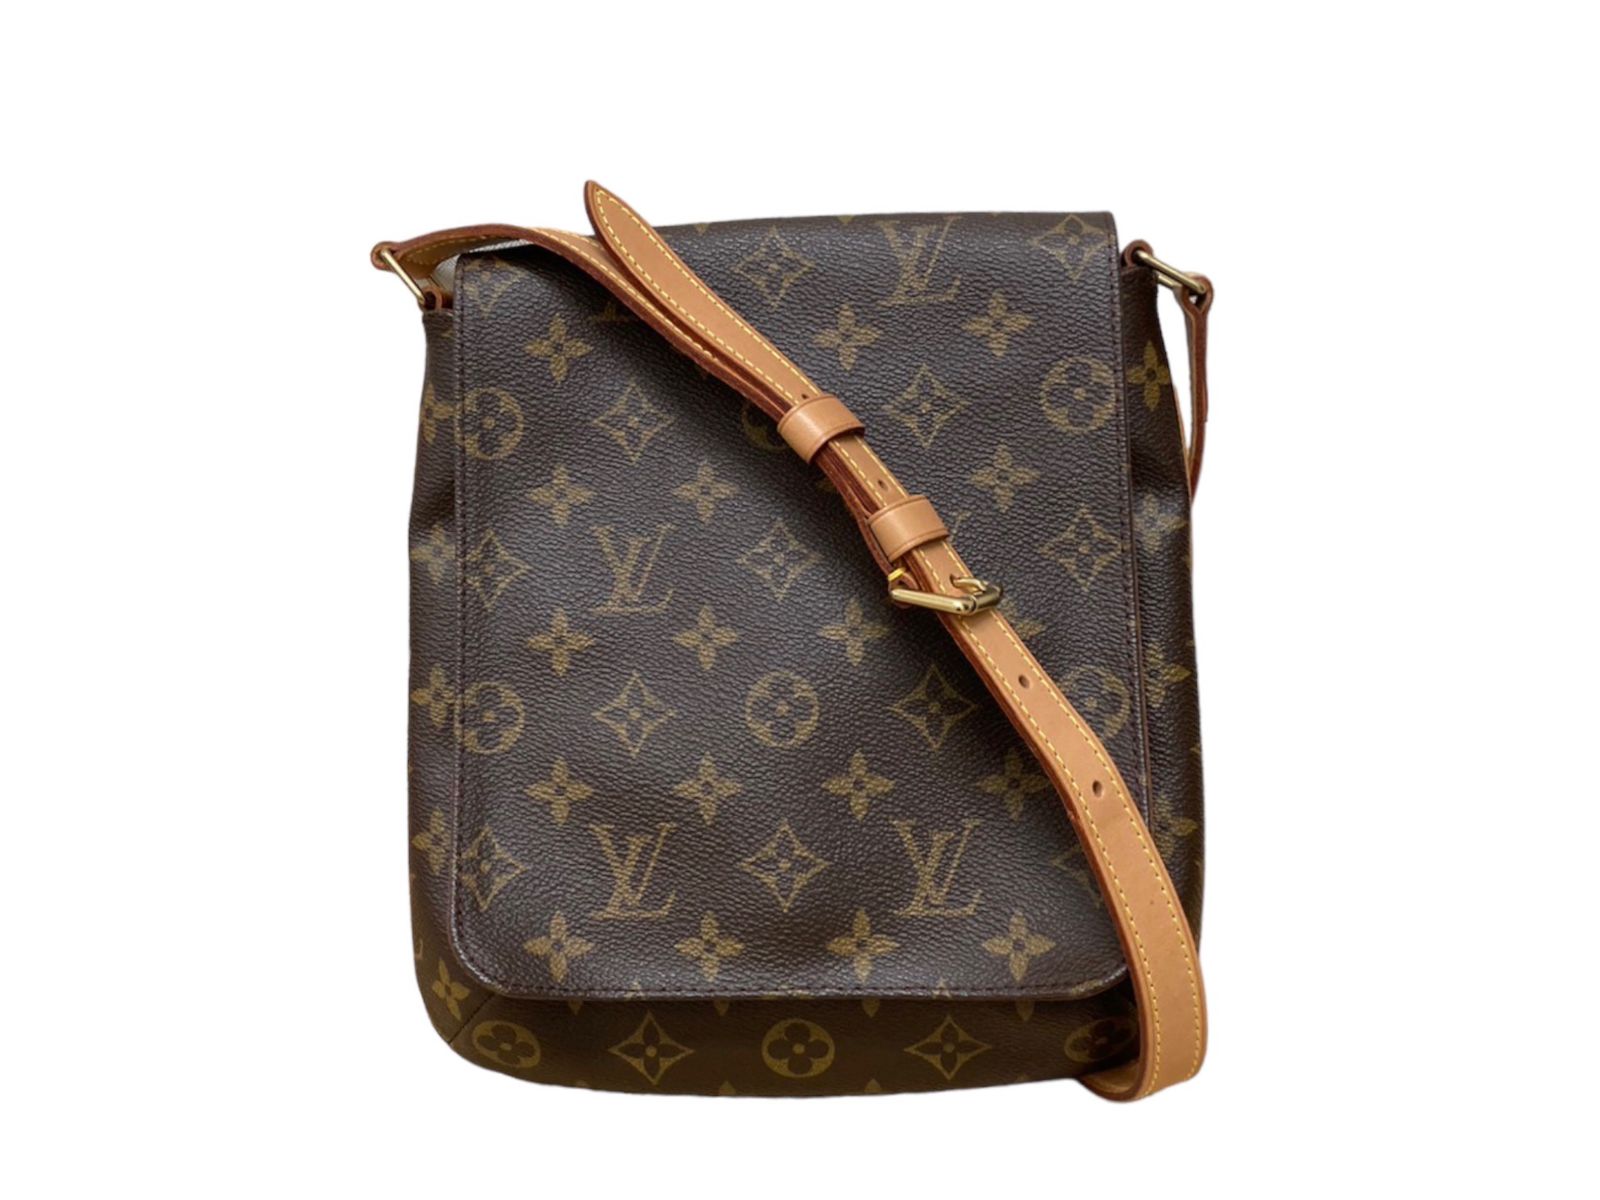 LOUIS VUITTON (ルイヴィトン) ルイヴィトン ミュゼット サルサ ロング ...